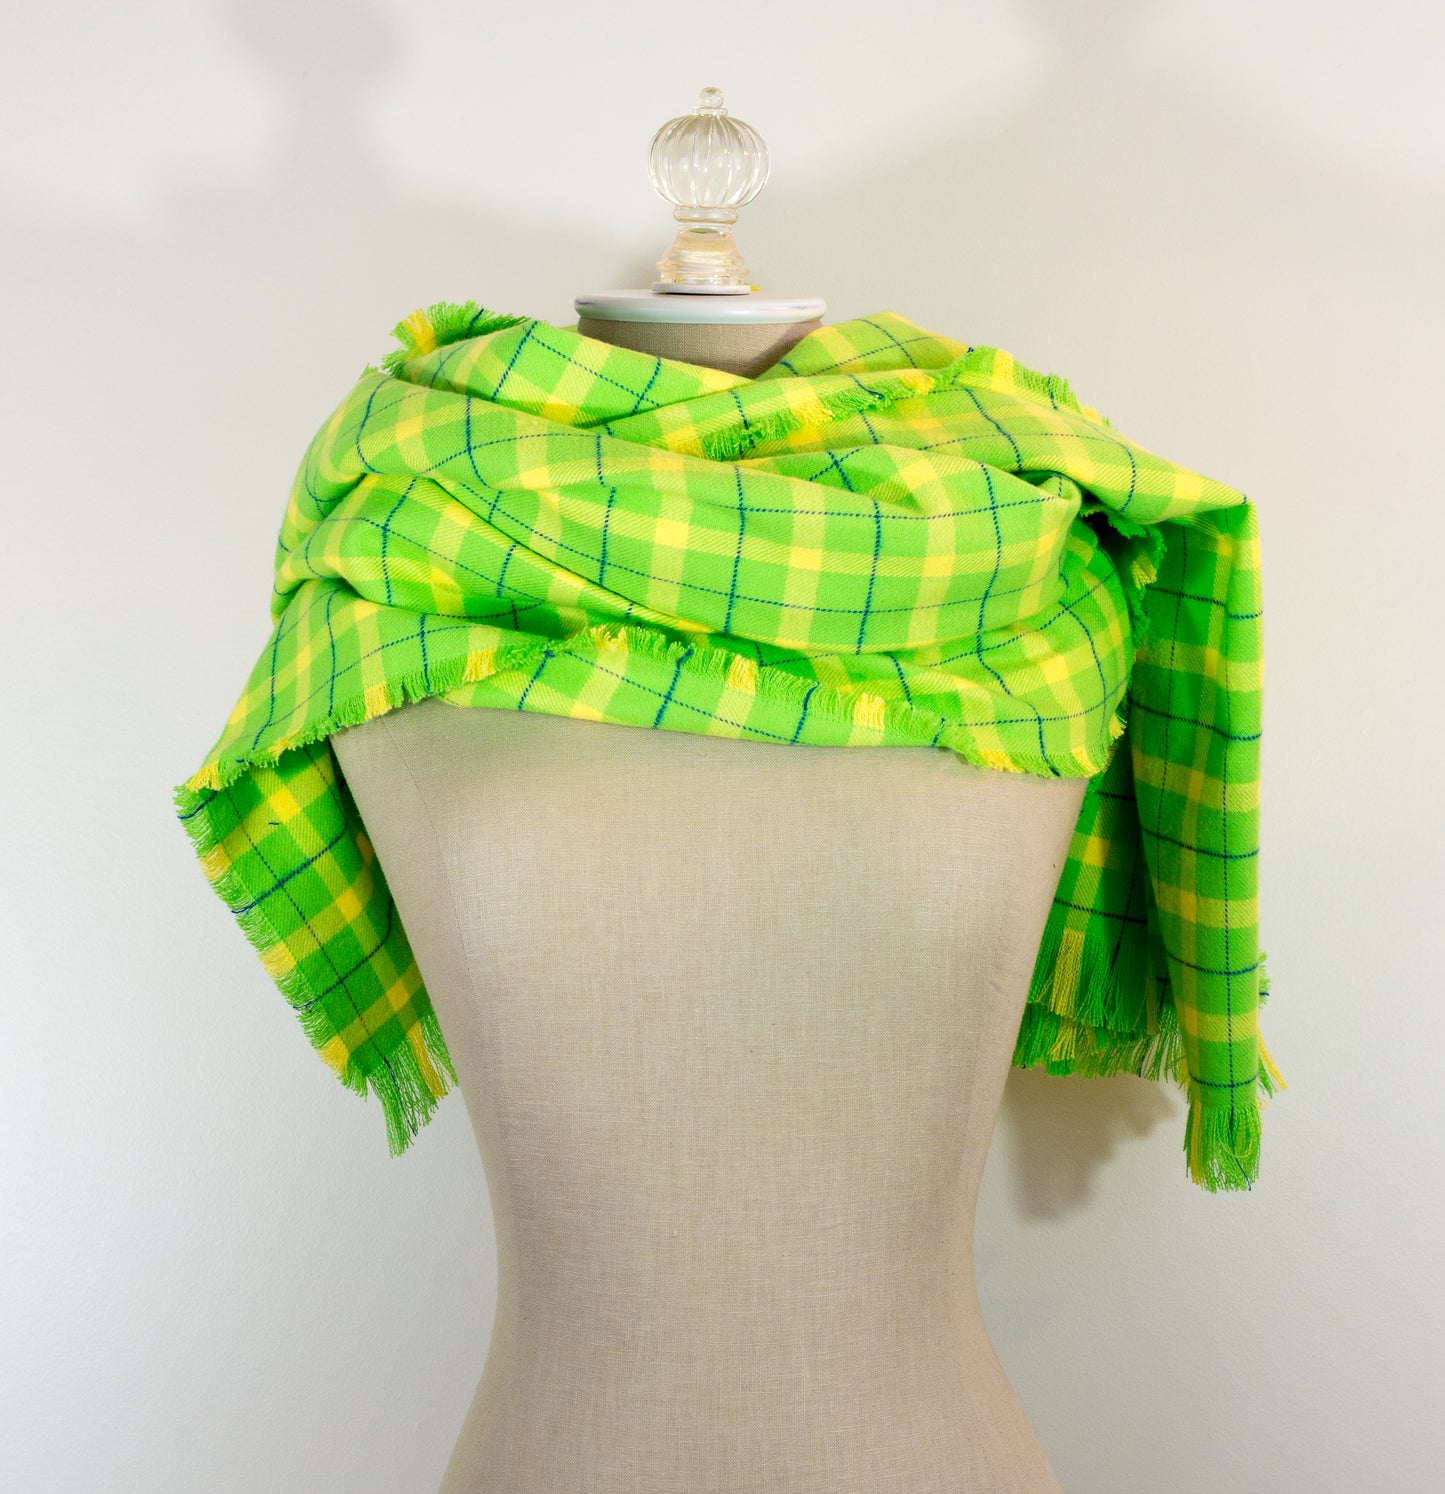 Lime Green Plaid Flannel Blanket Scarf: 23" x 72" Shawl with Kilt Pin